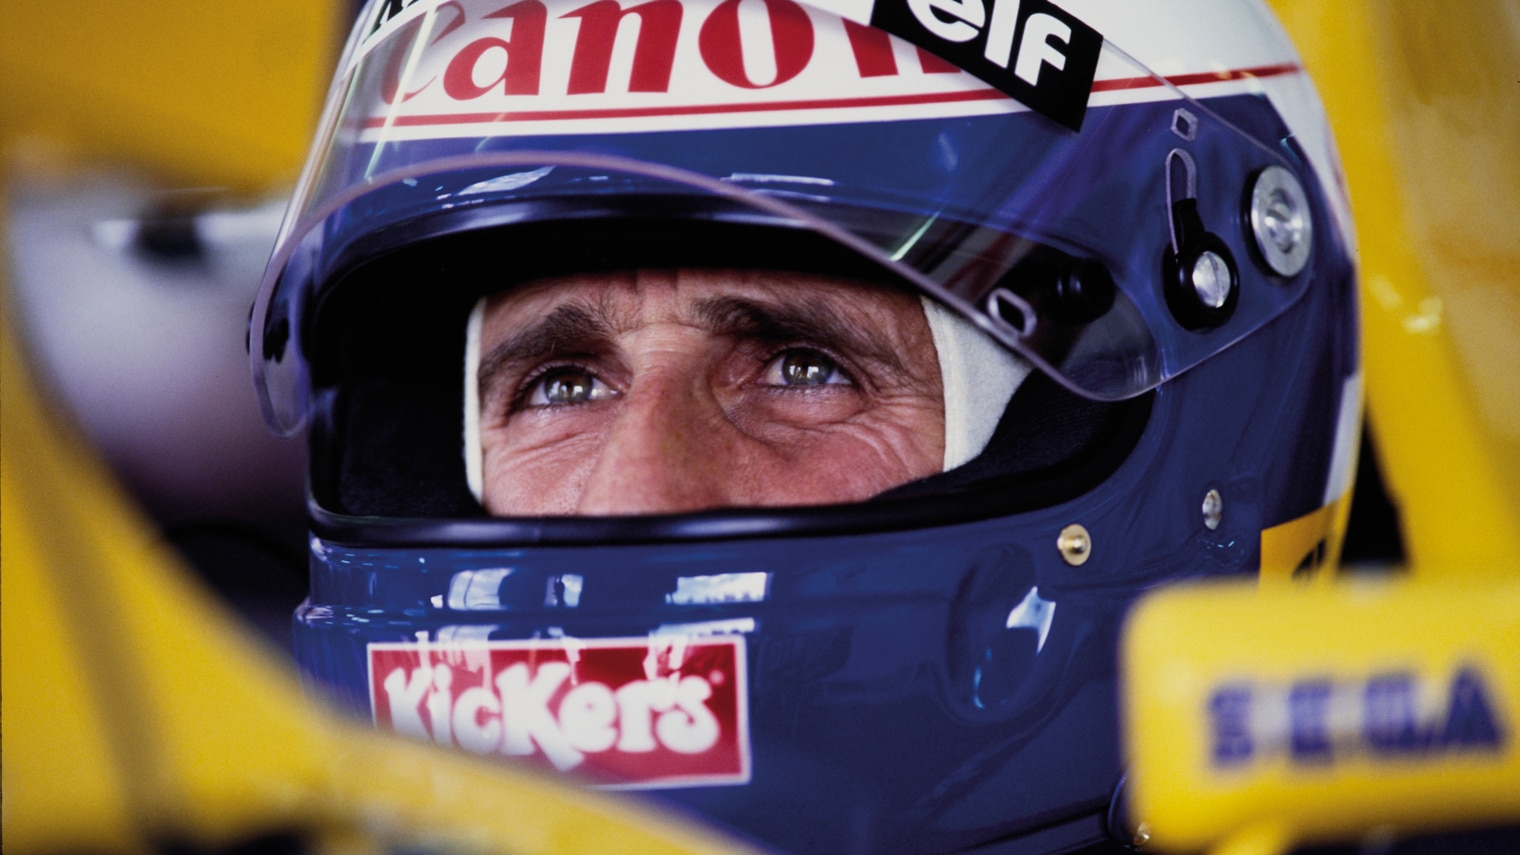 Alain Prost won his fourth and final world title with Williams in 1993